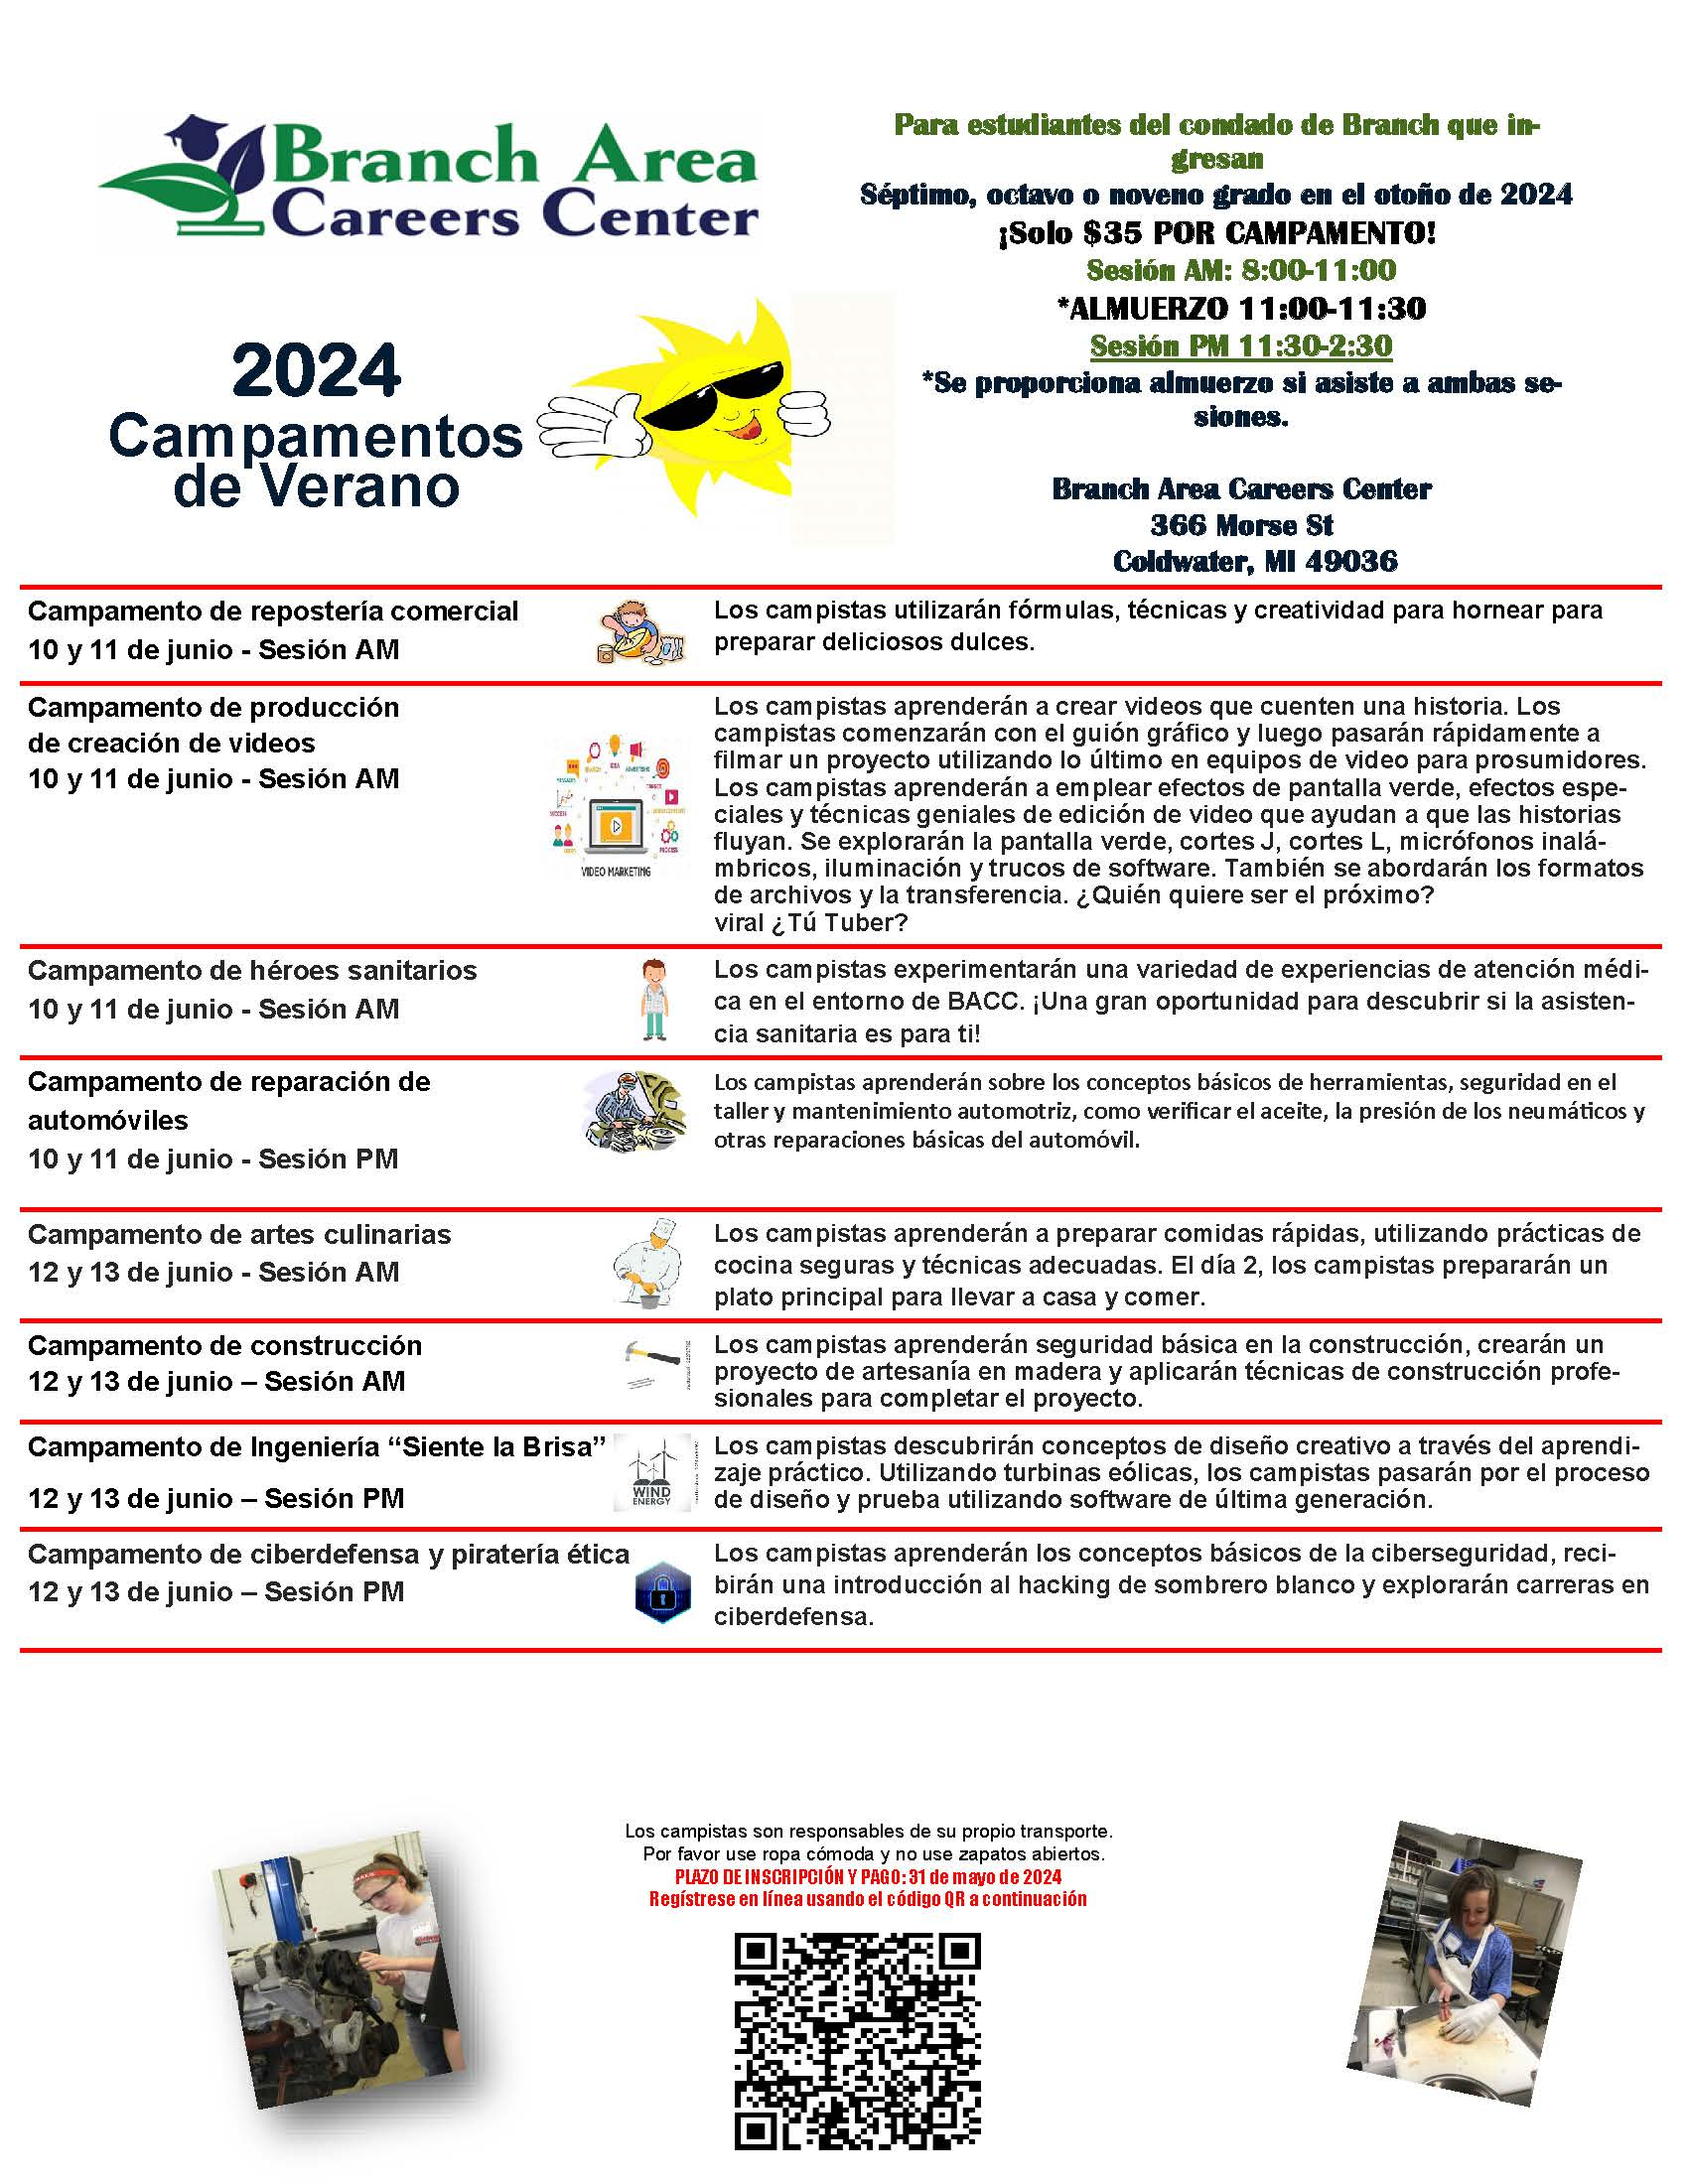 BACC Summer Camps Descriptions in Spanish